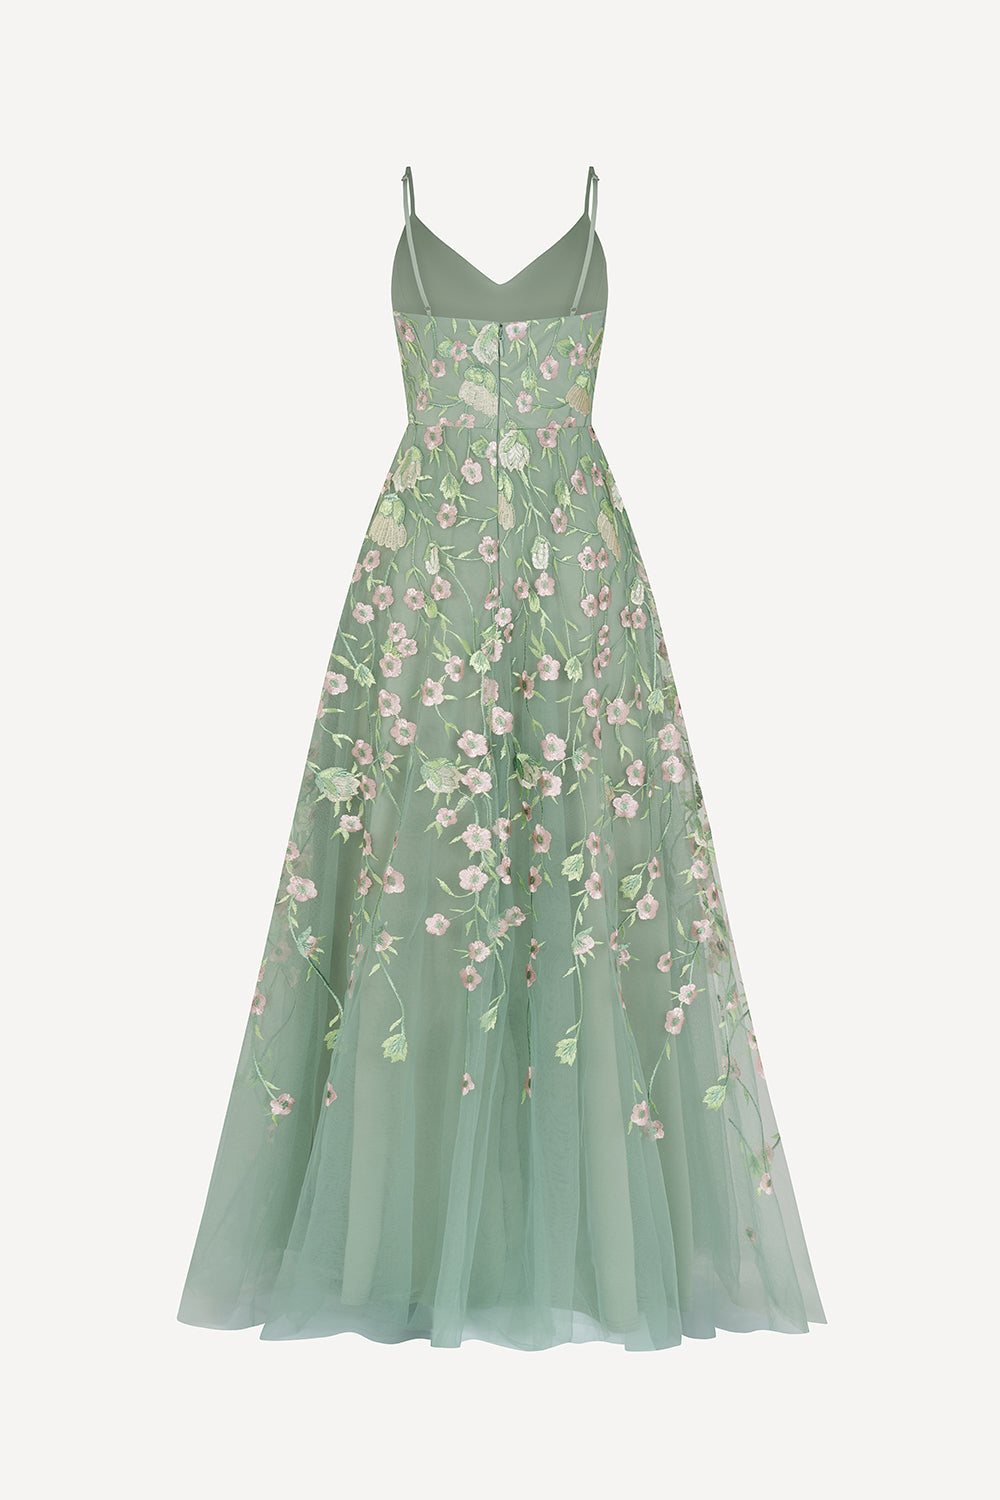 Midsummer dream tulle gown in sage